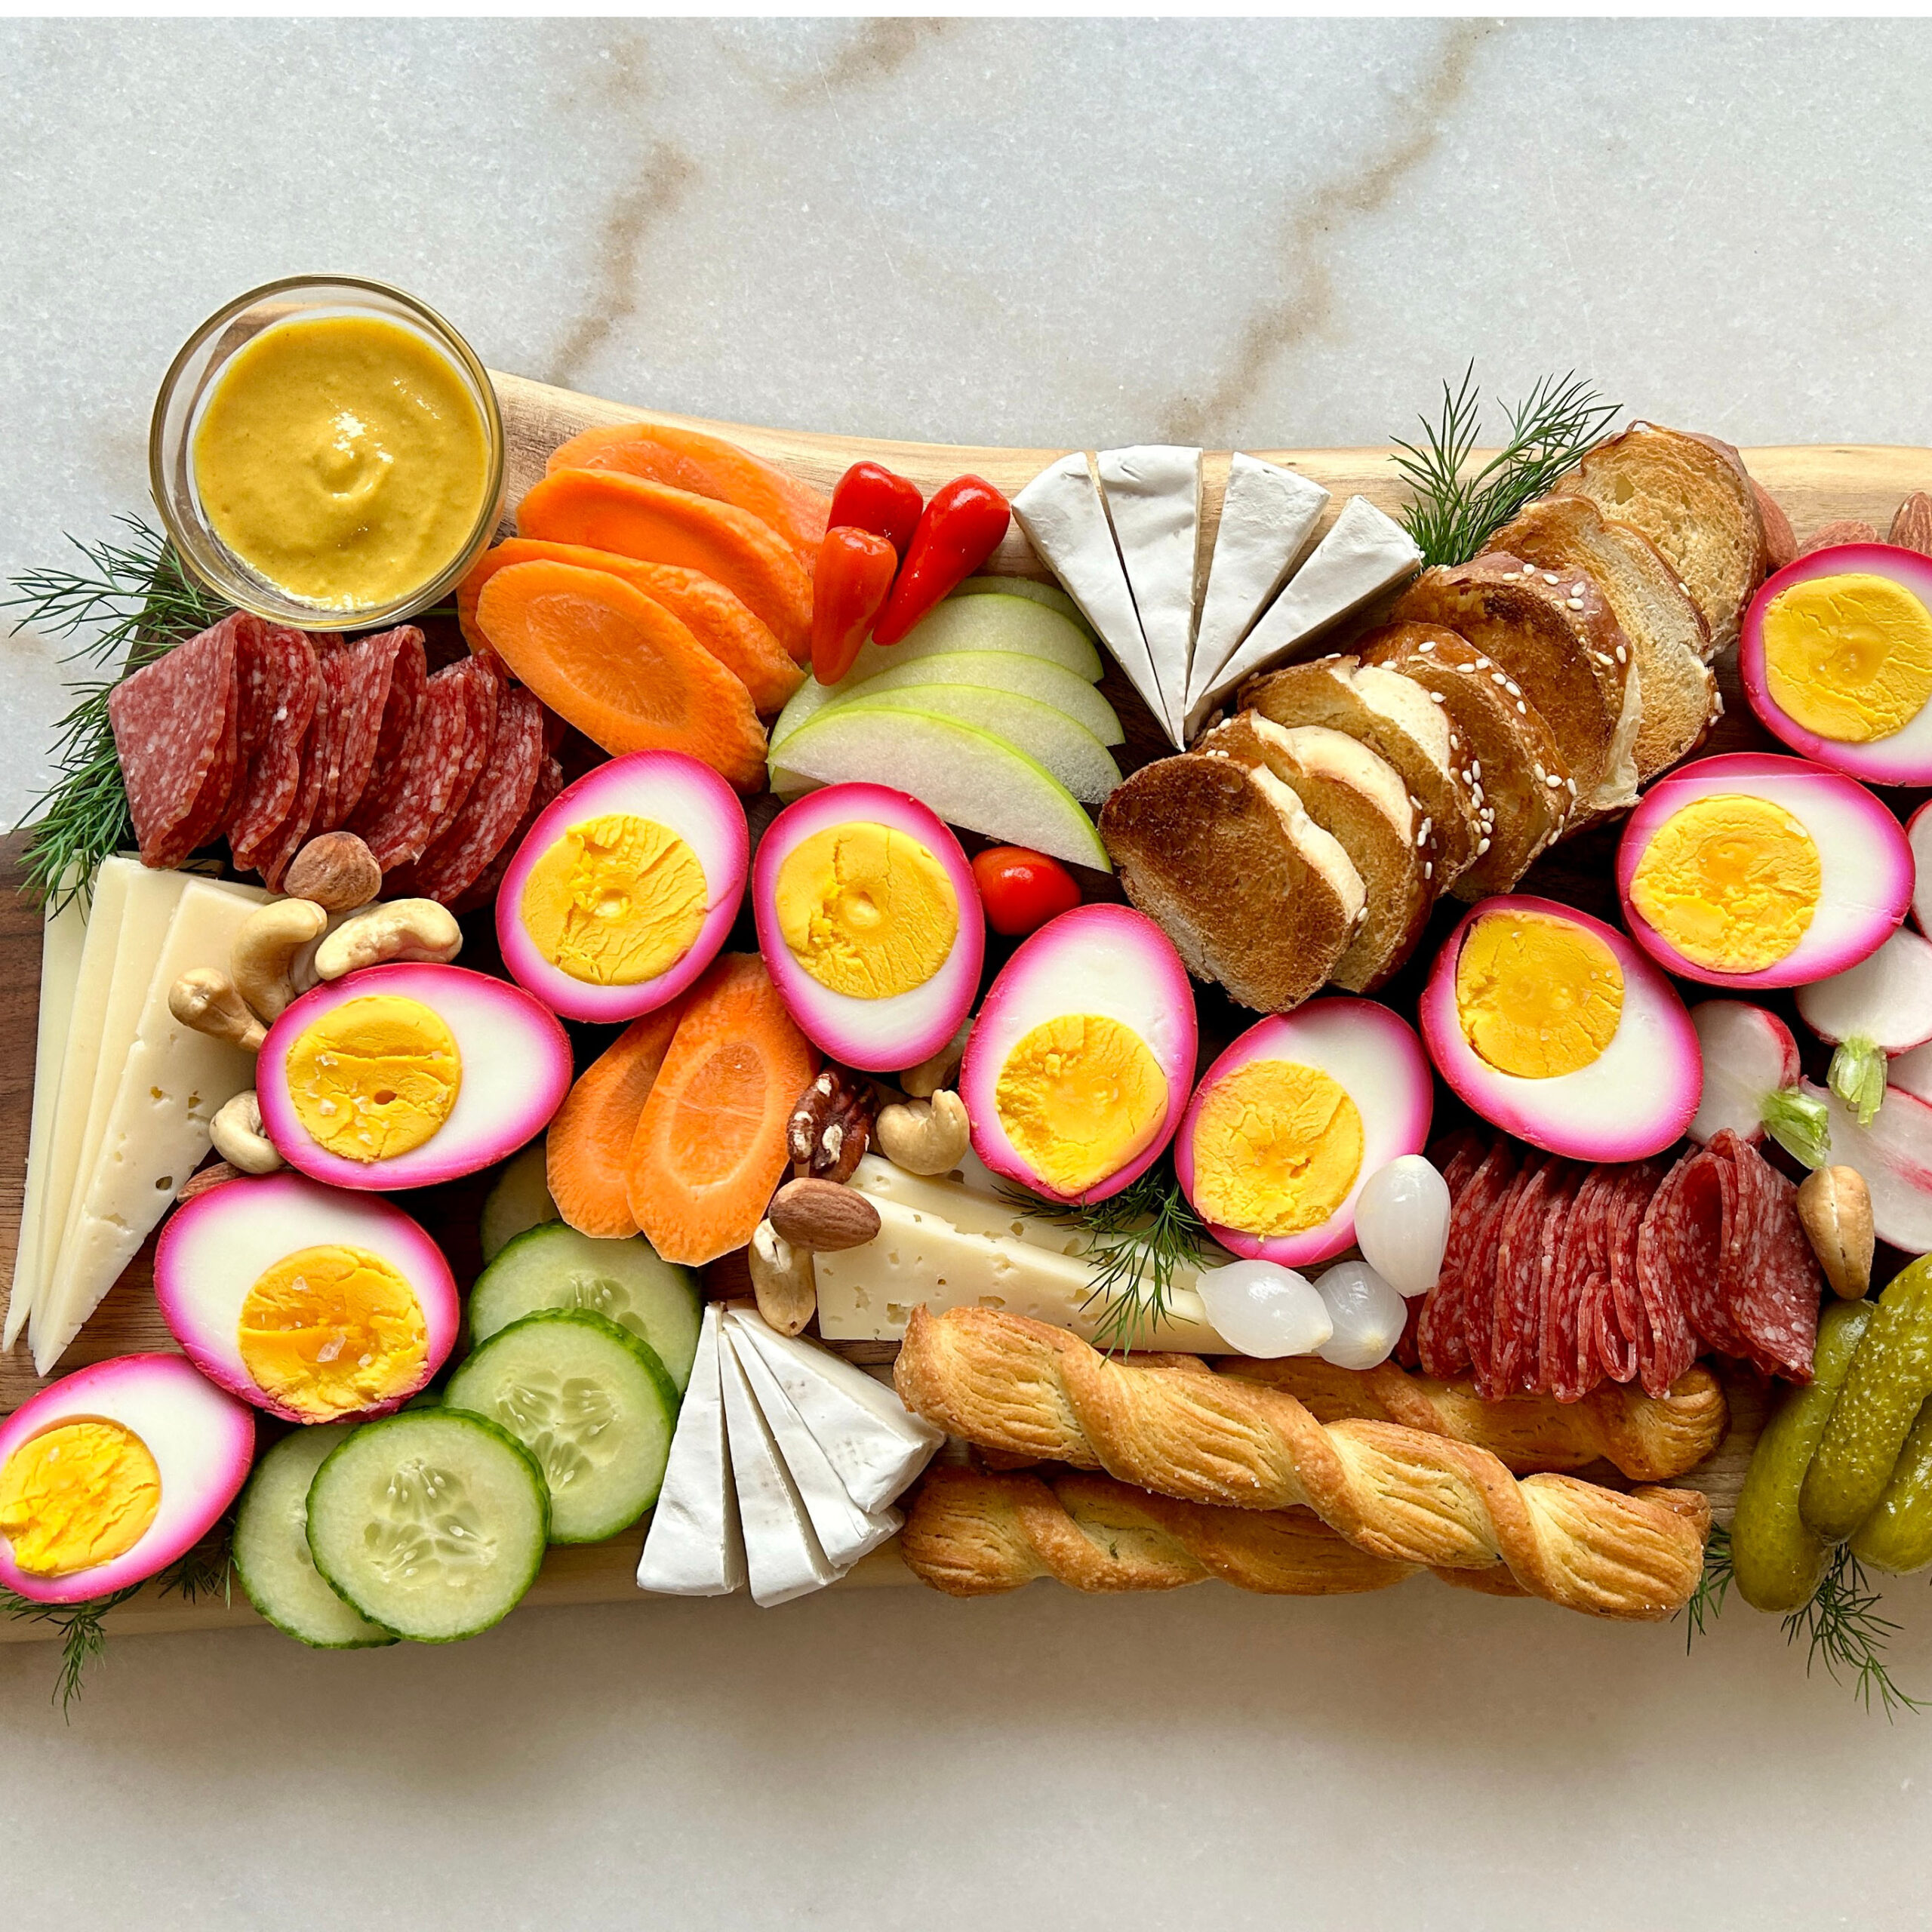 th-German-Inspired Charcuterie Board with Beet-Pickled Eggs